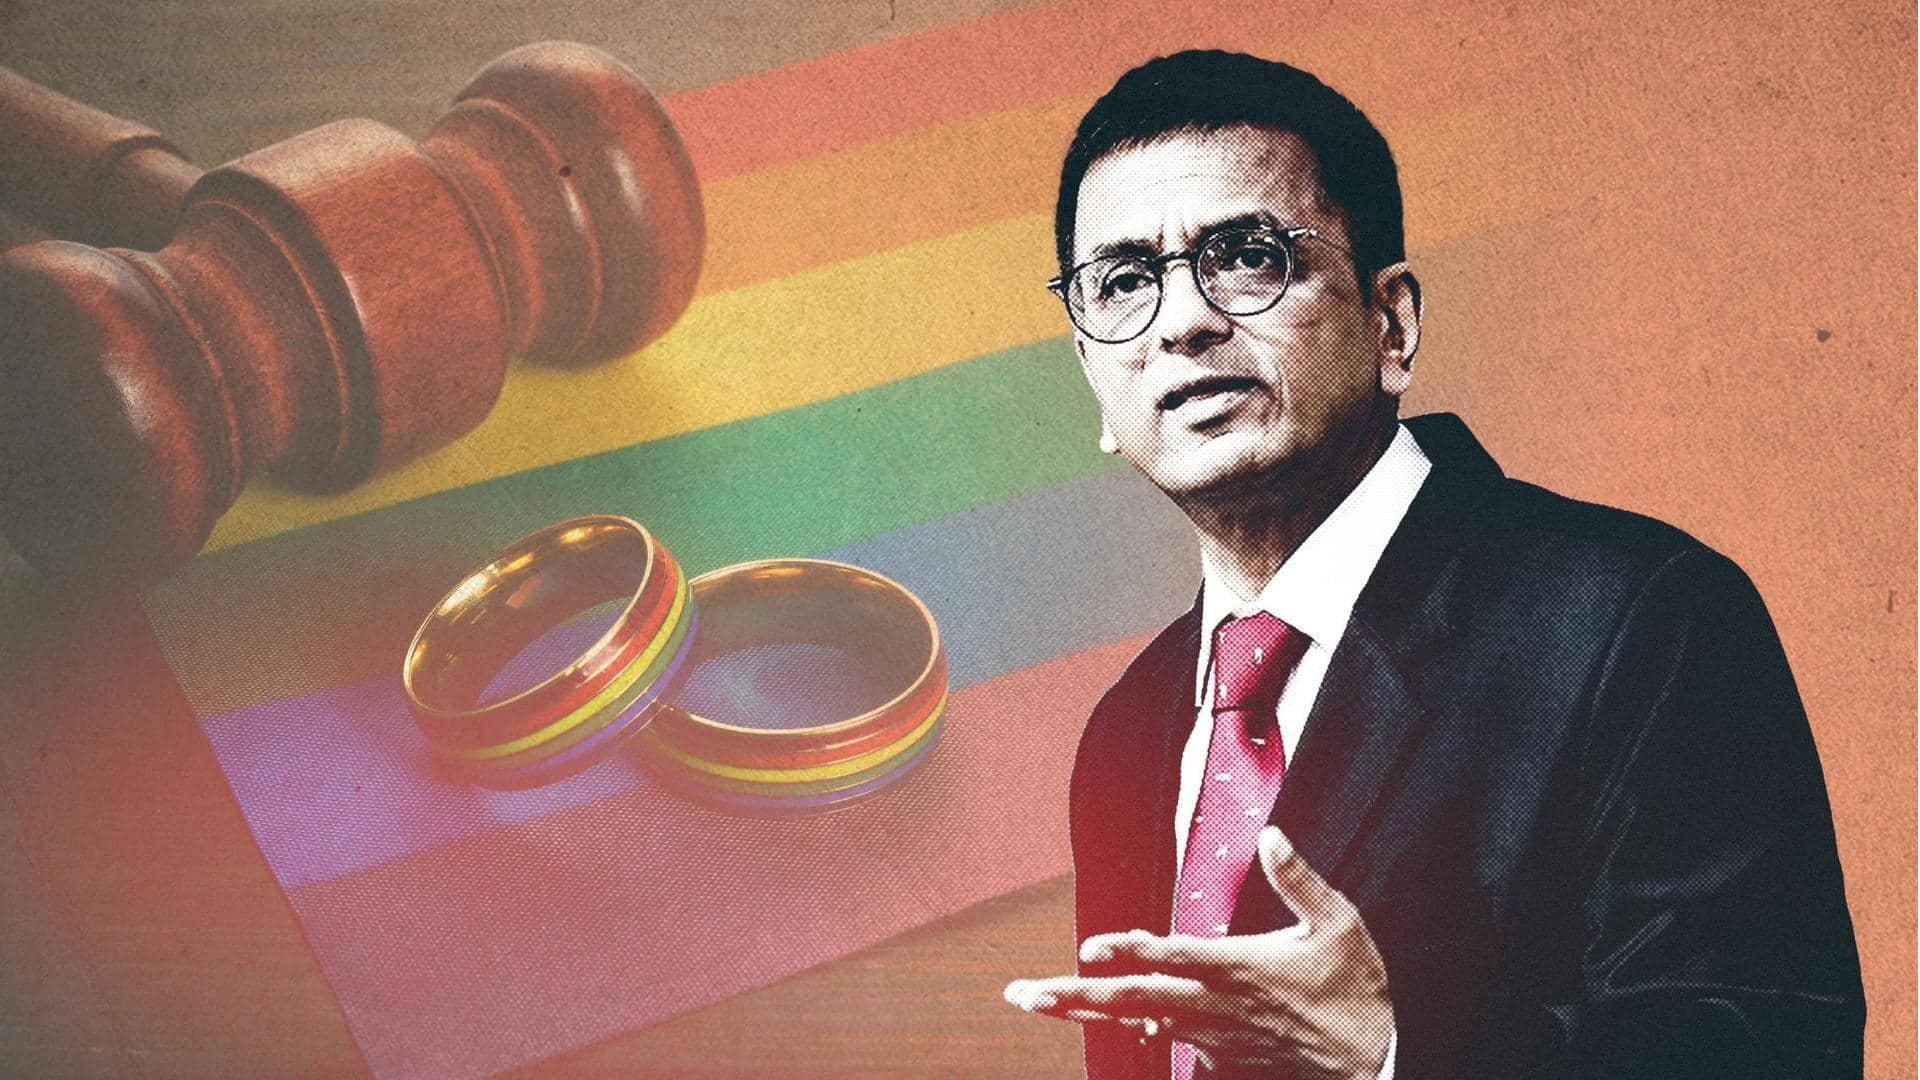 Law allows same-sex couples to adopt child, asserts CJI